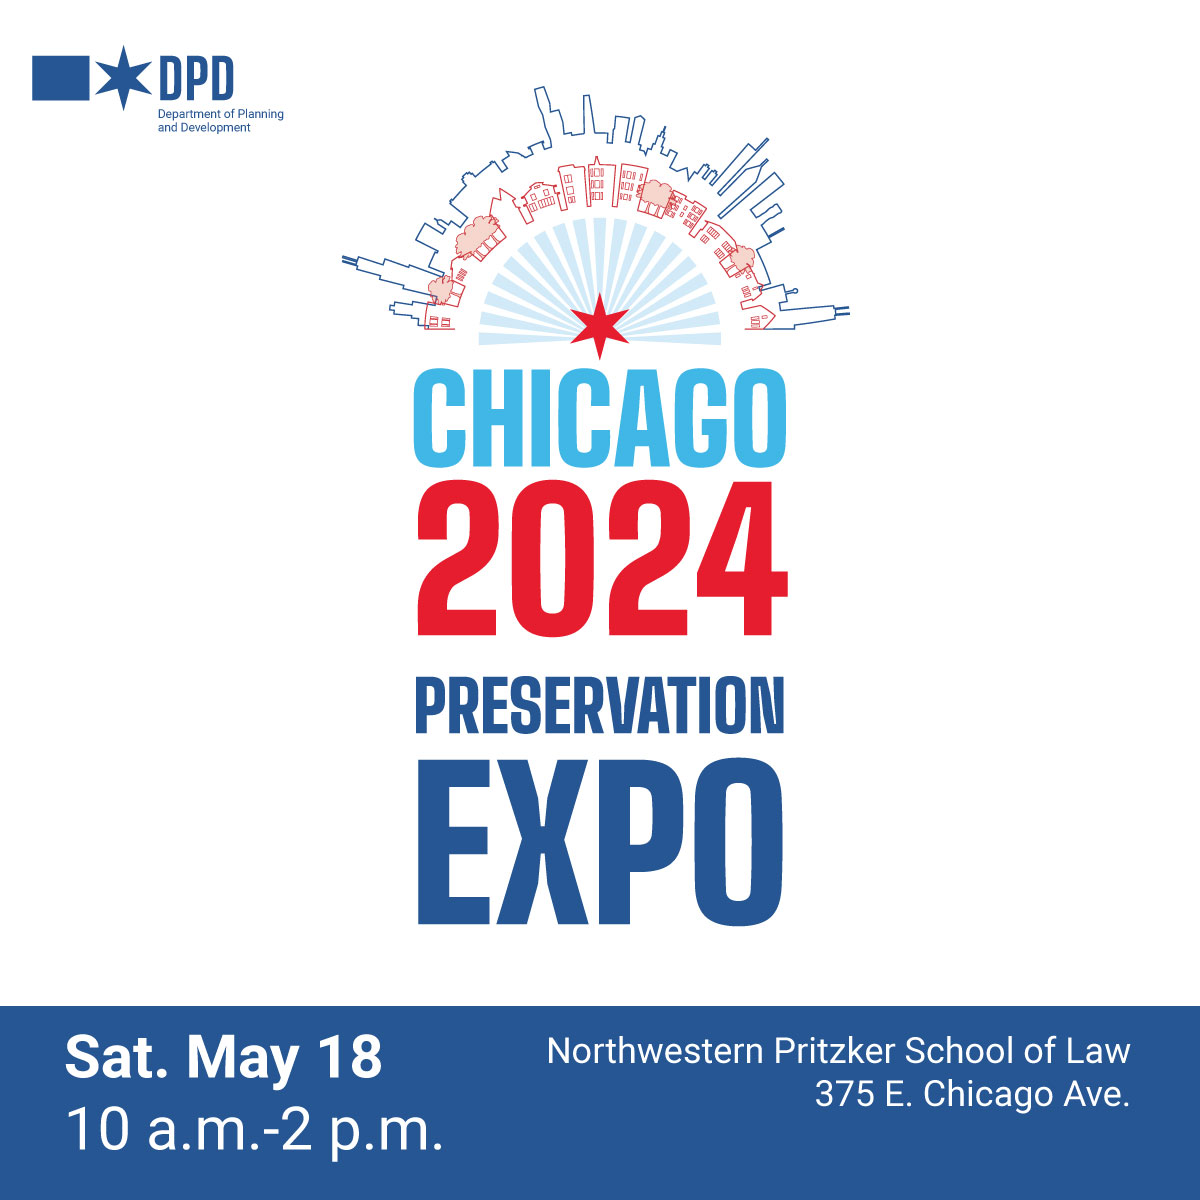 On Saturday, May 18, join DPD for the Chicago 2024 Preservation Expo, featuring Geoffrey Baer. At this free event, connect with City staff, organizations and professionals at the forefront of historic preservation. Learn more and register at Chicago.gov/Preservation-M….